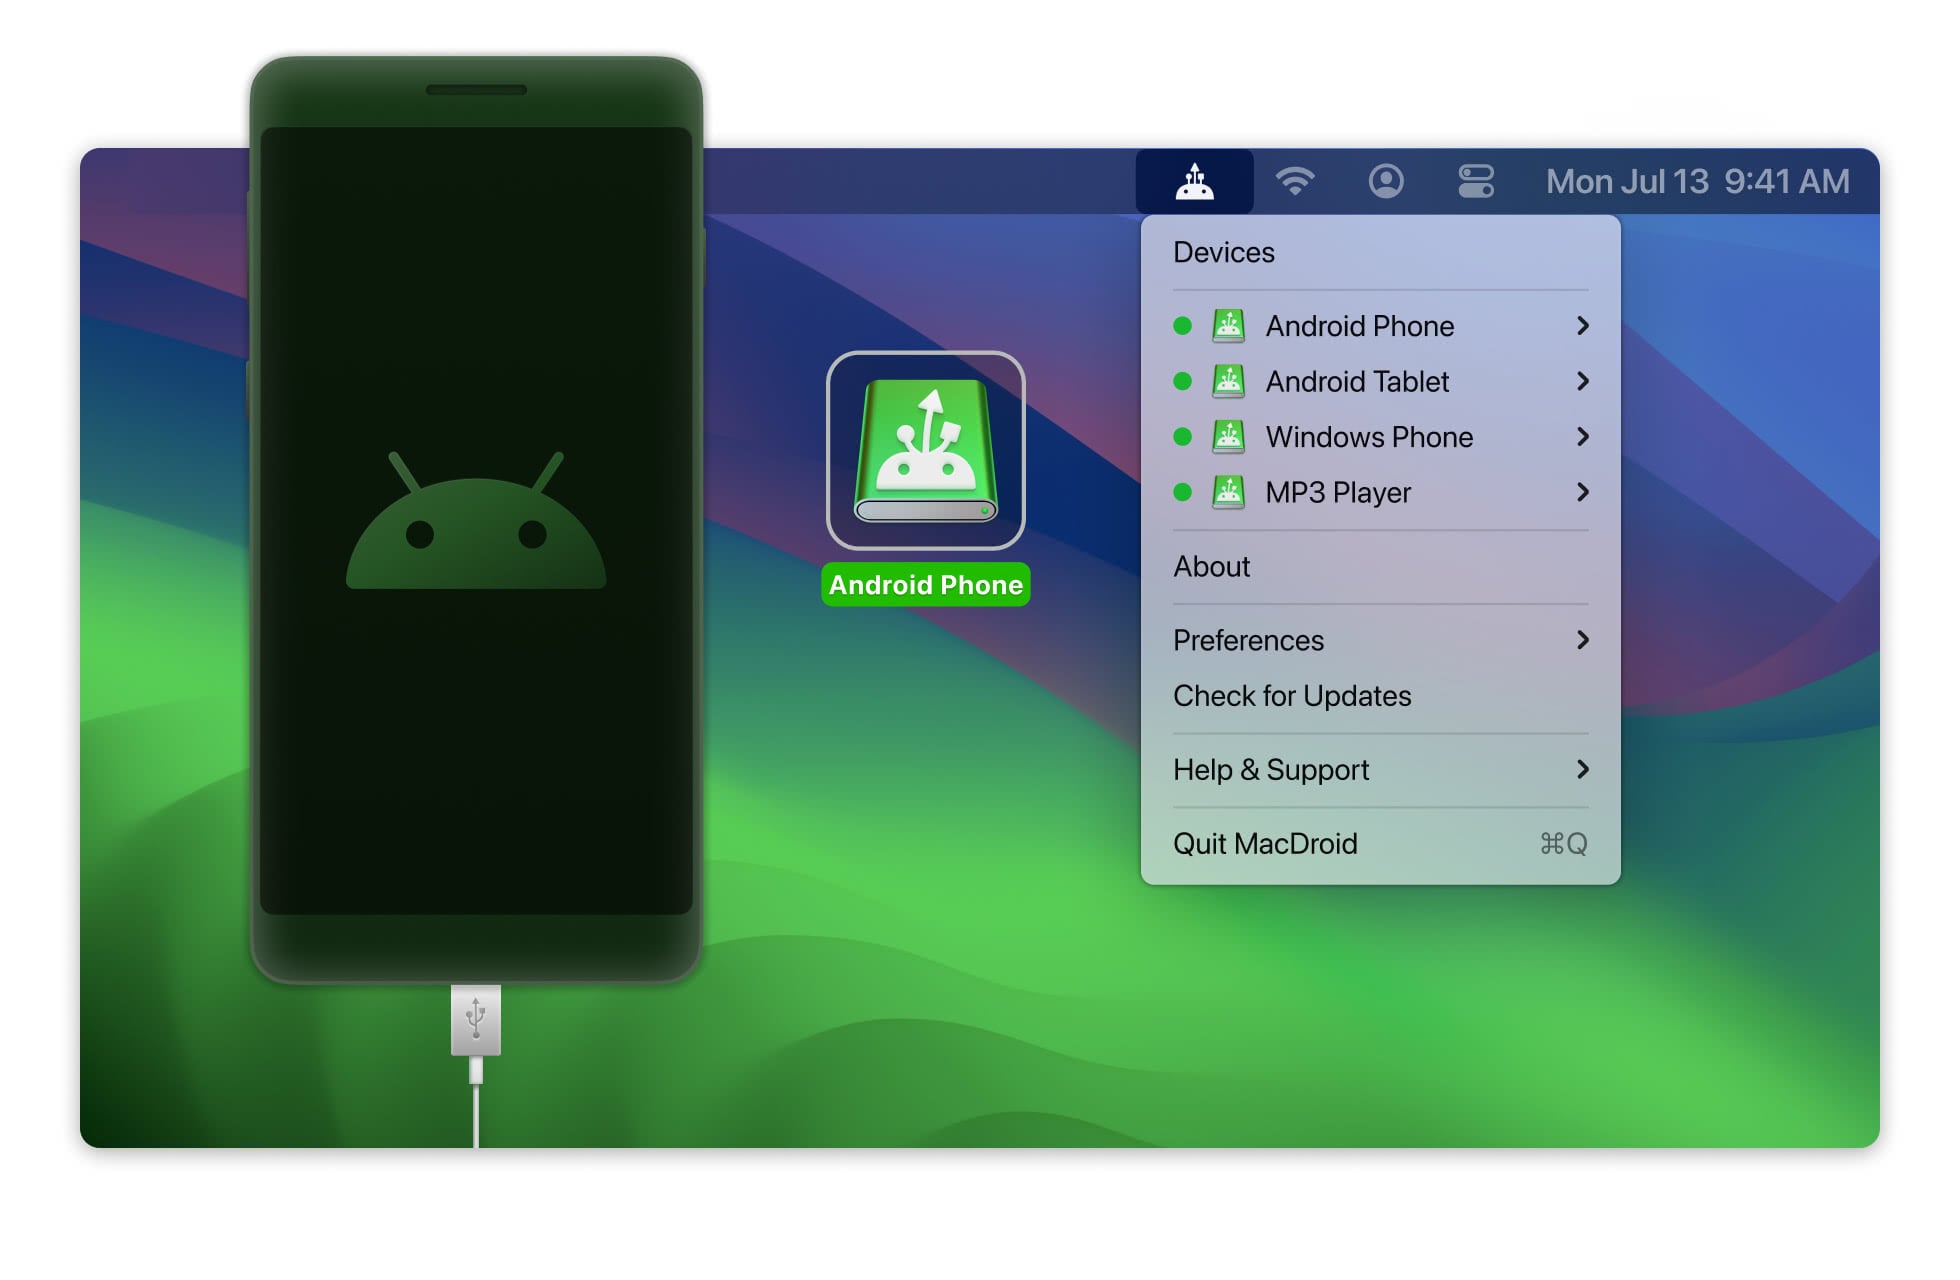 If Android File Transfer can’t access device storage, try alternative - Macdroid 